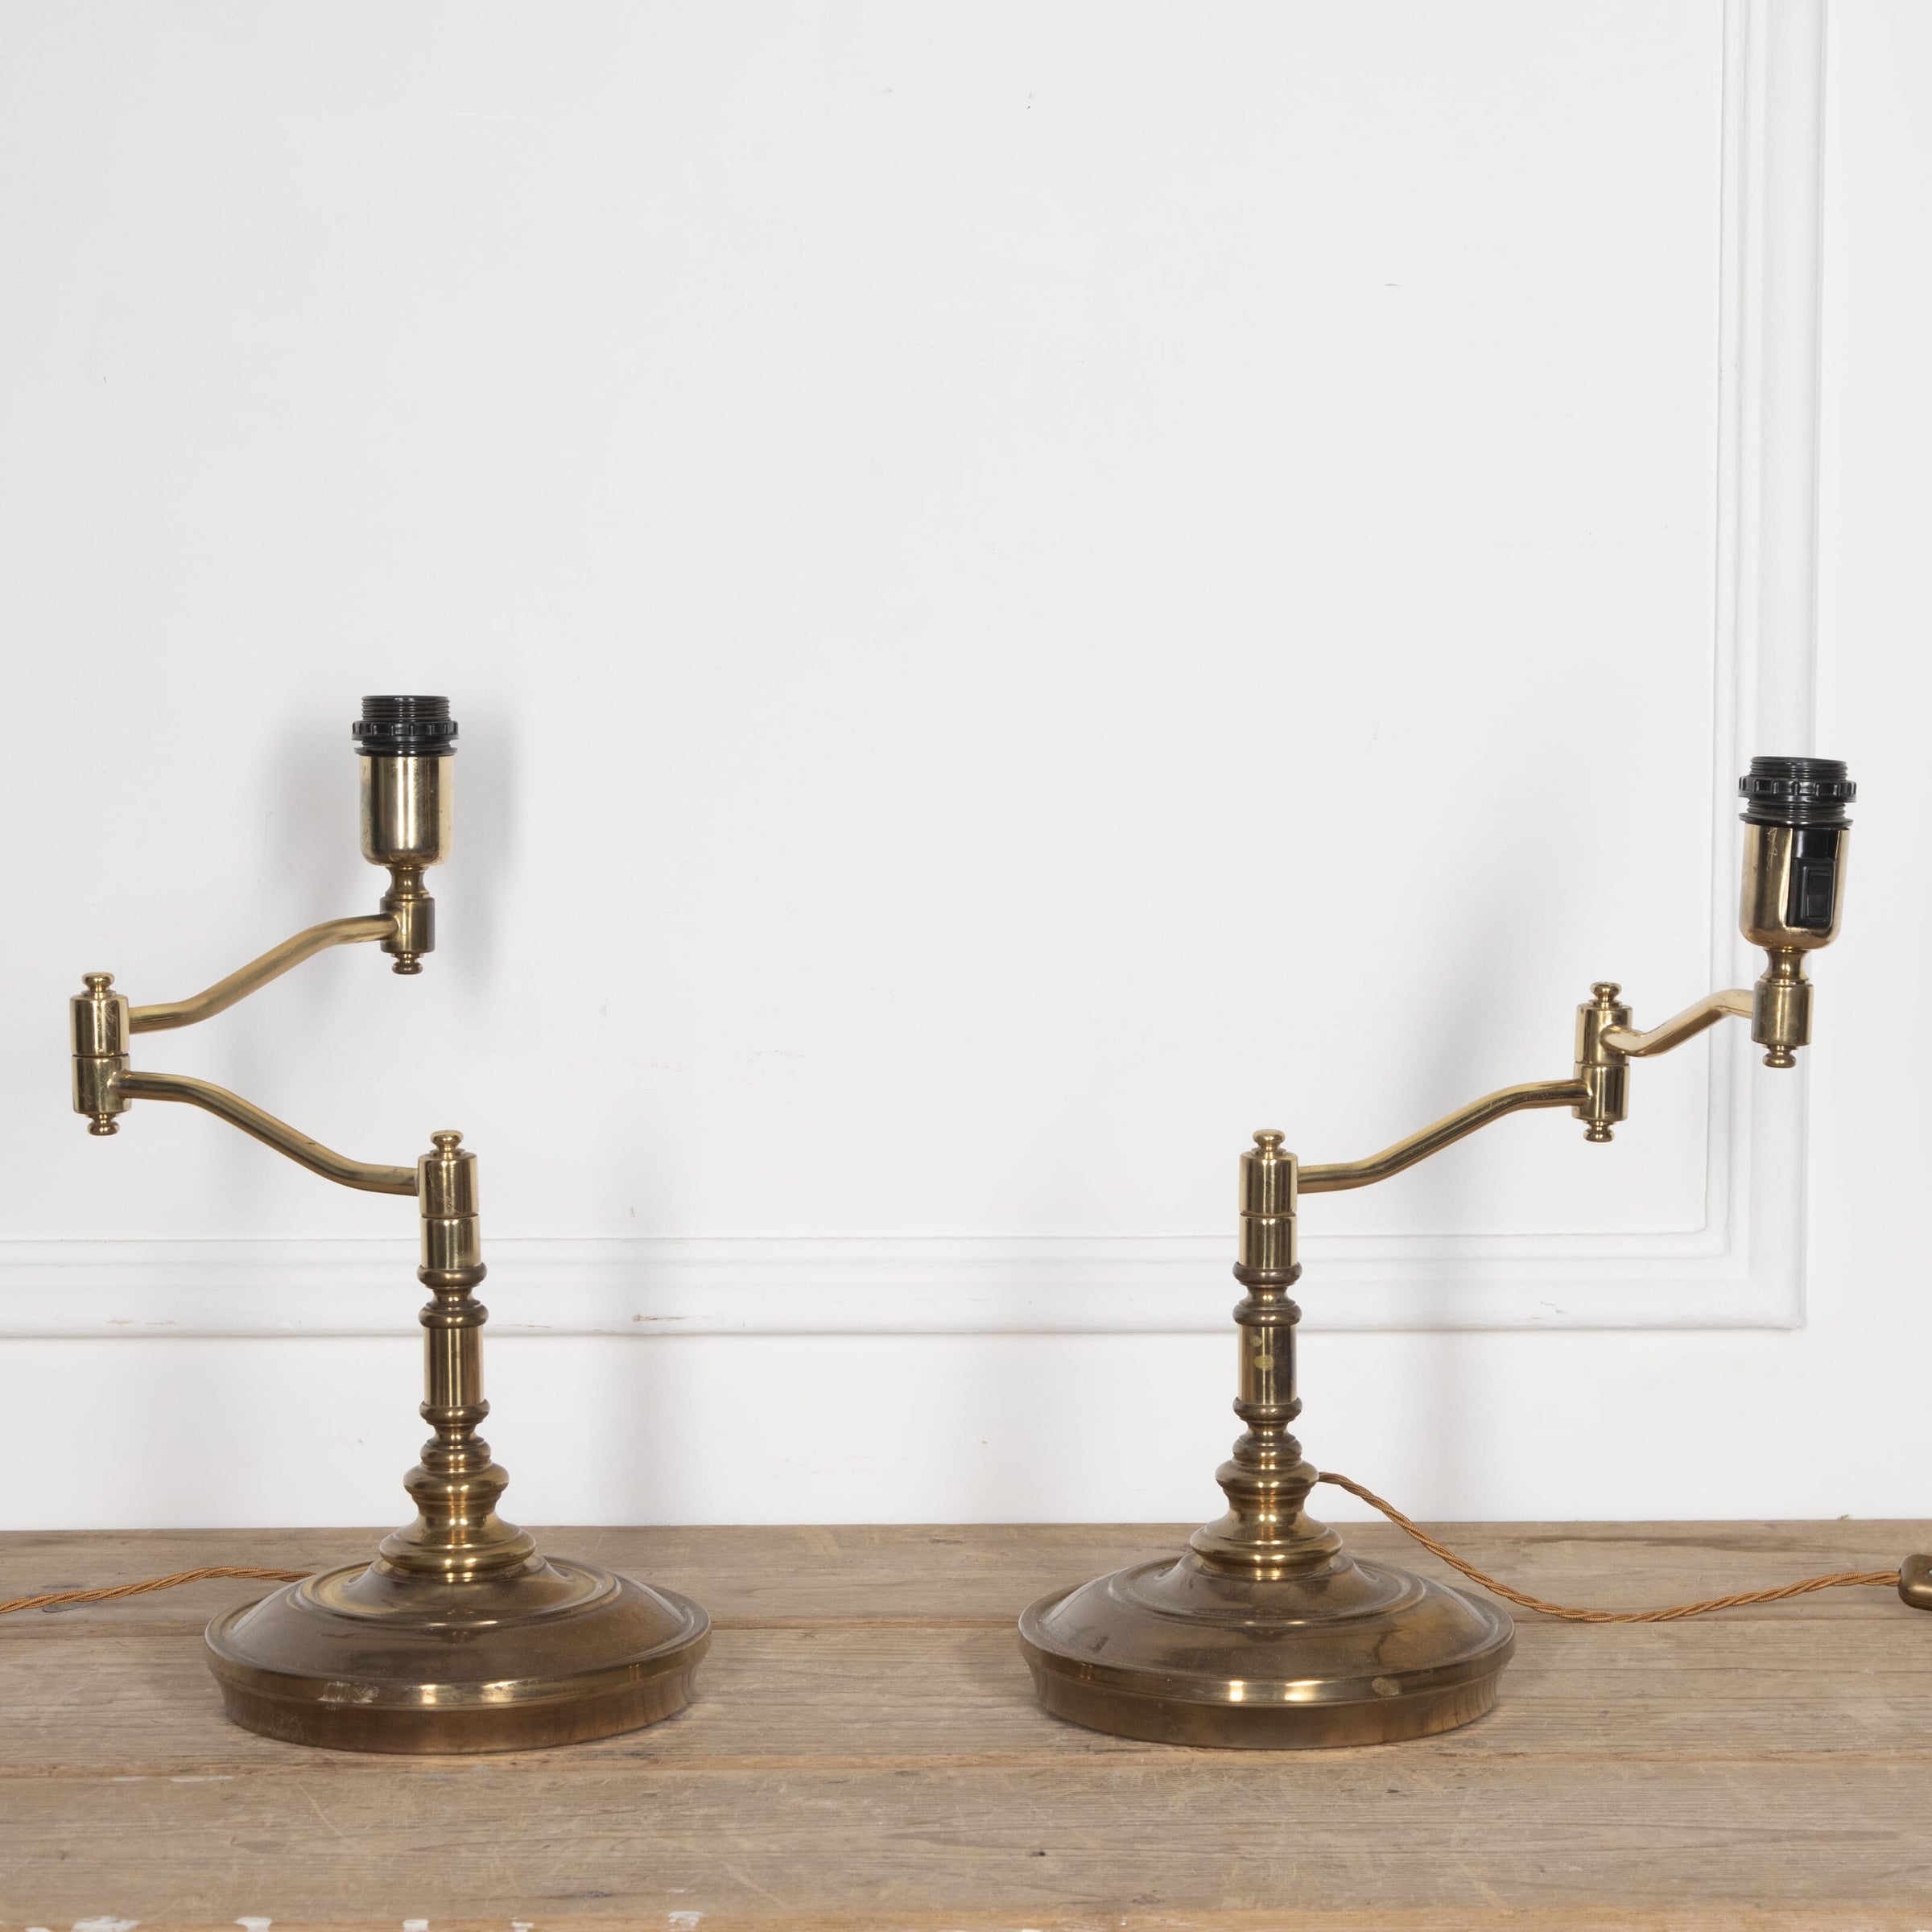 PAIR OF ARTICULATED TABLE LAMPS